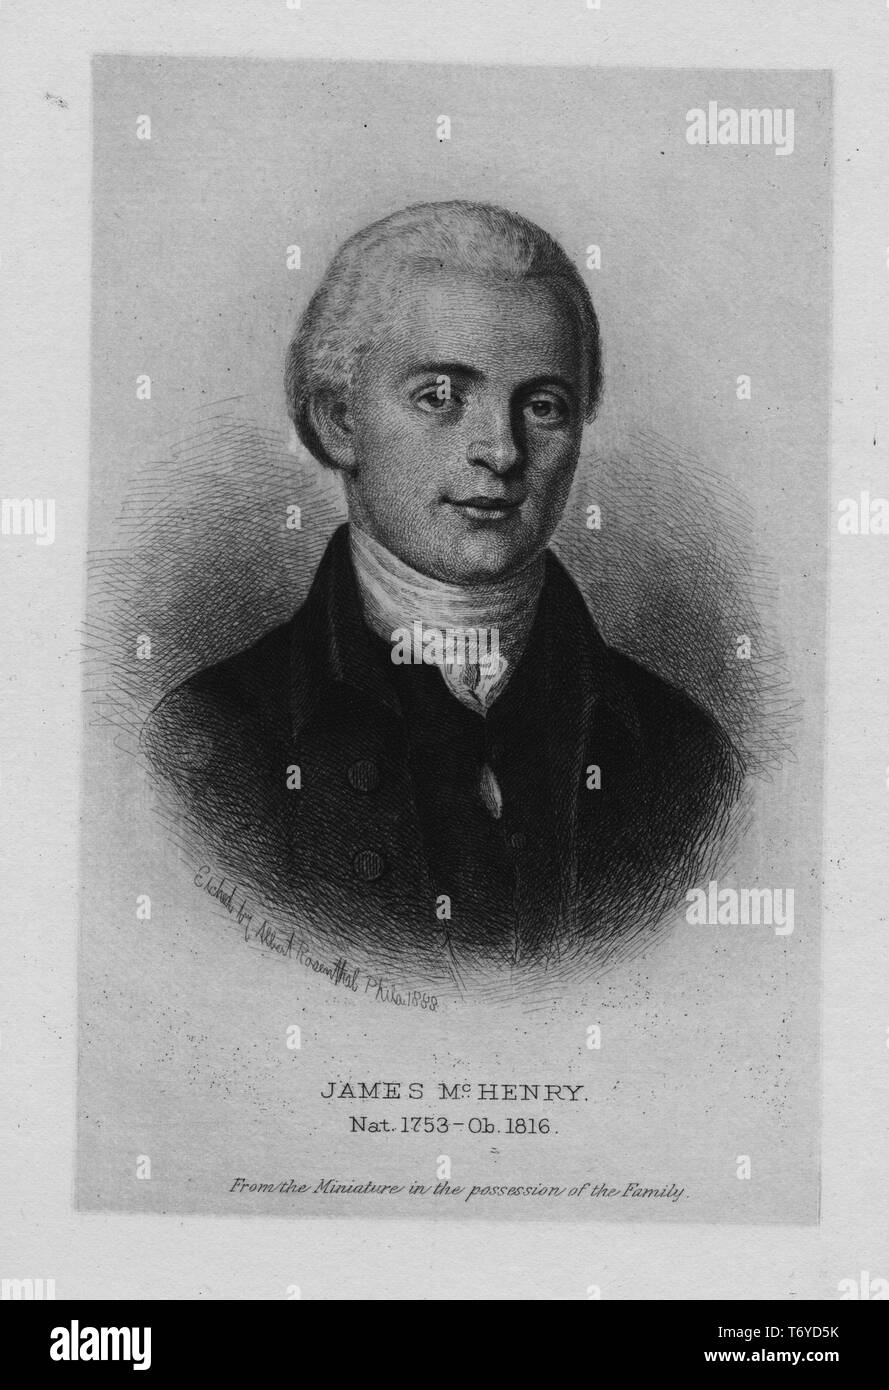 Engraved portrait of James McHenry, signer of the United States Constitution, an Irish-American military surgeon and delegate to the Continental Congress from Maryland, 1888. From the New York Public Library. () Stock Photo